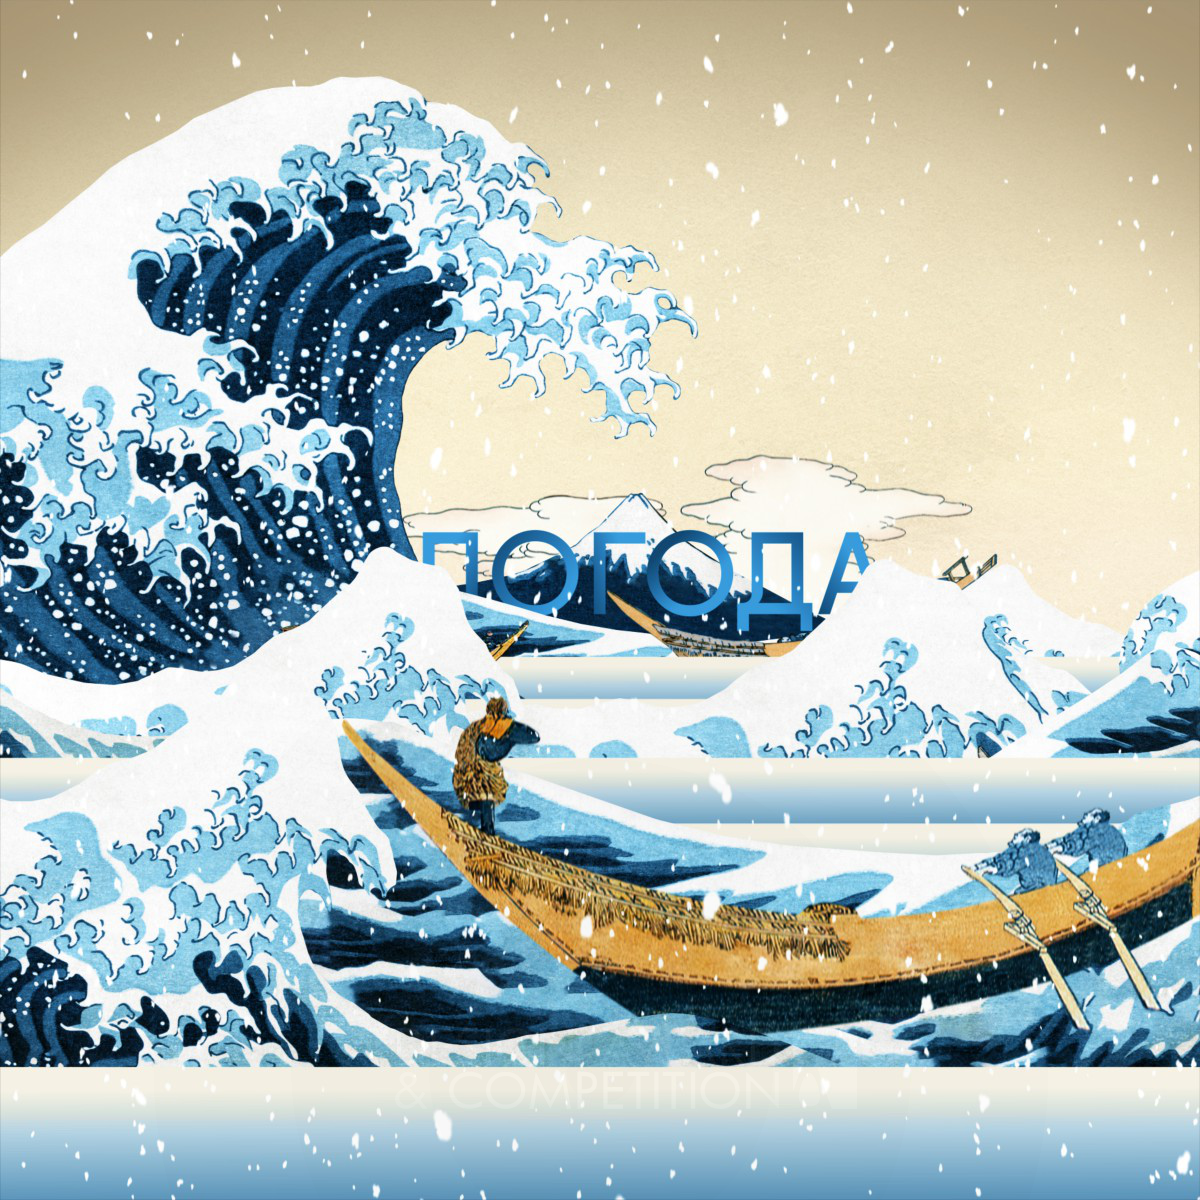 Artistic Animation Project "Japan in Winter" Showcases Katsushika Hokusai's Prints for Weather Forecasting